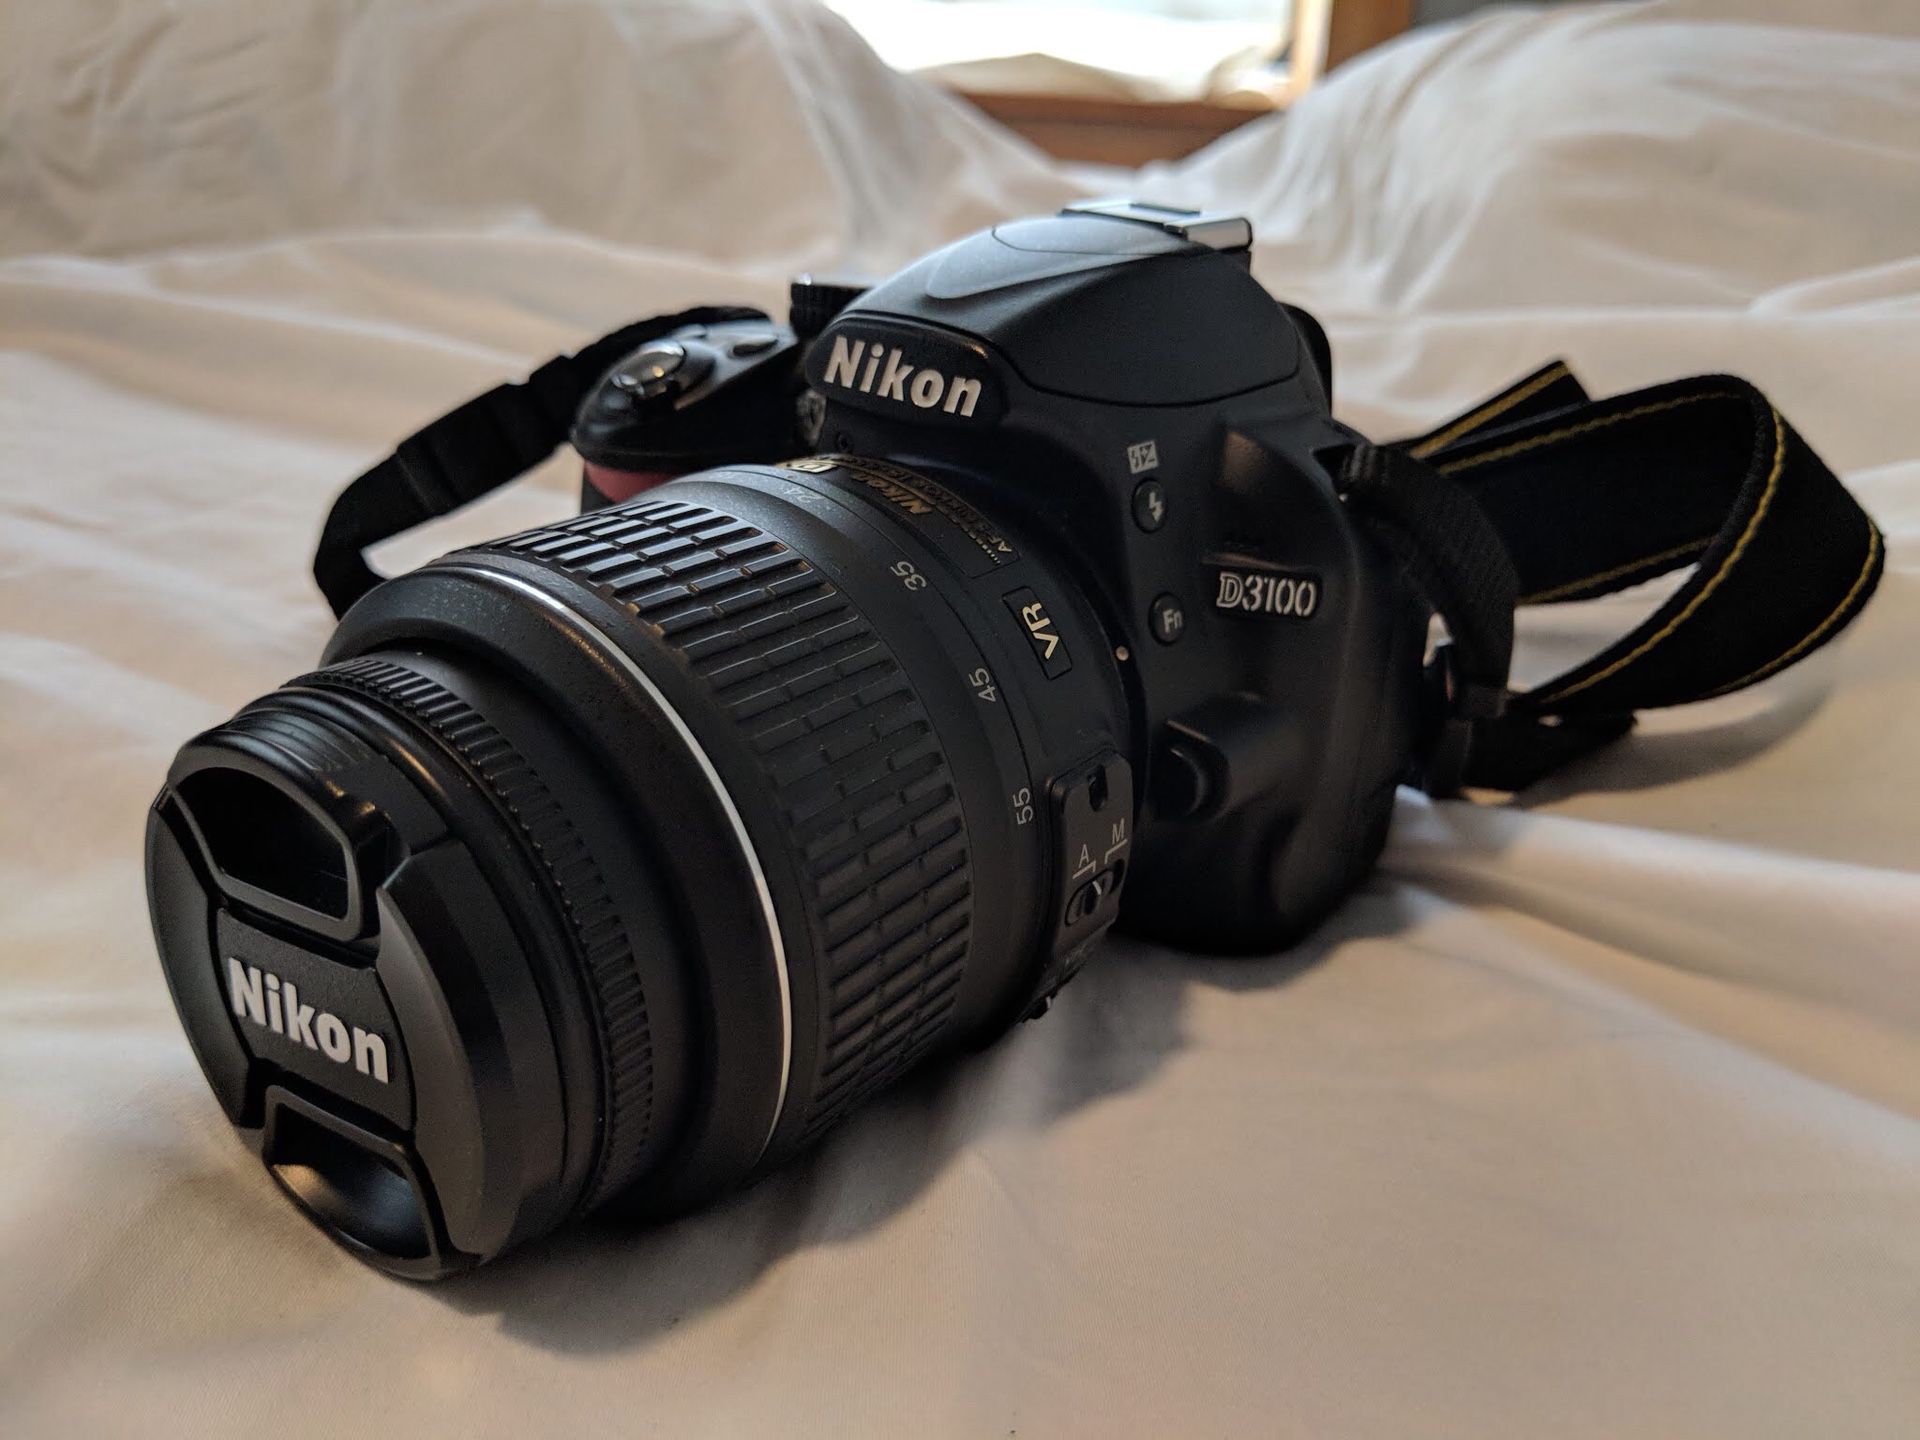 Nikon DSLR D3100 Camera with 55-200mm Lenses and Carrying Bag